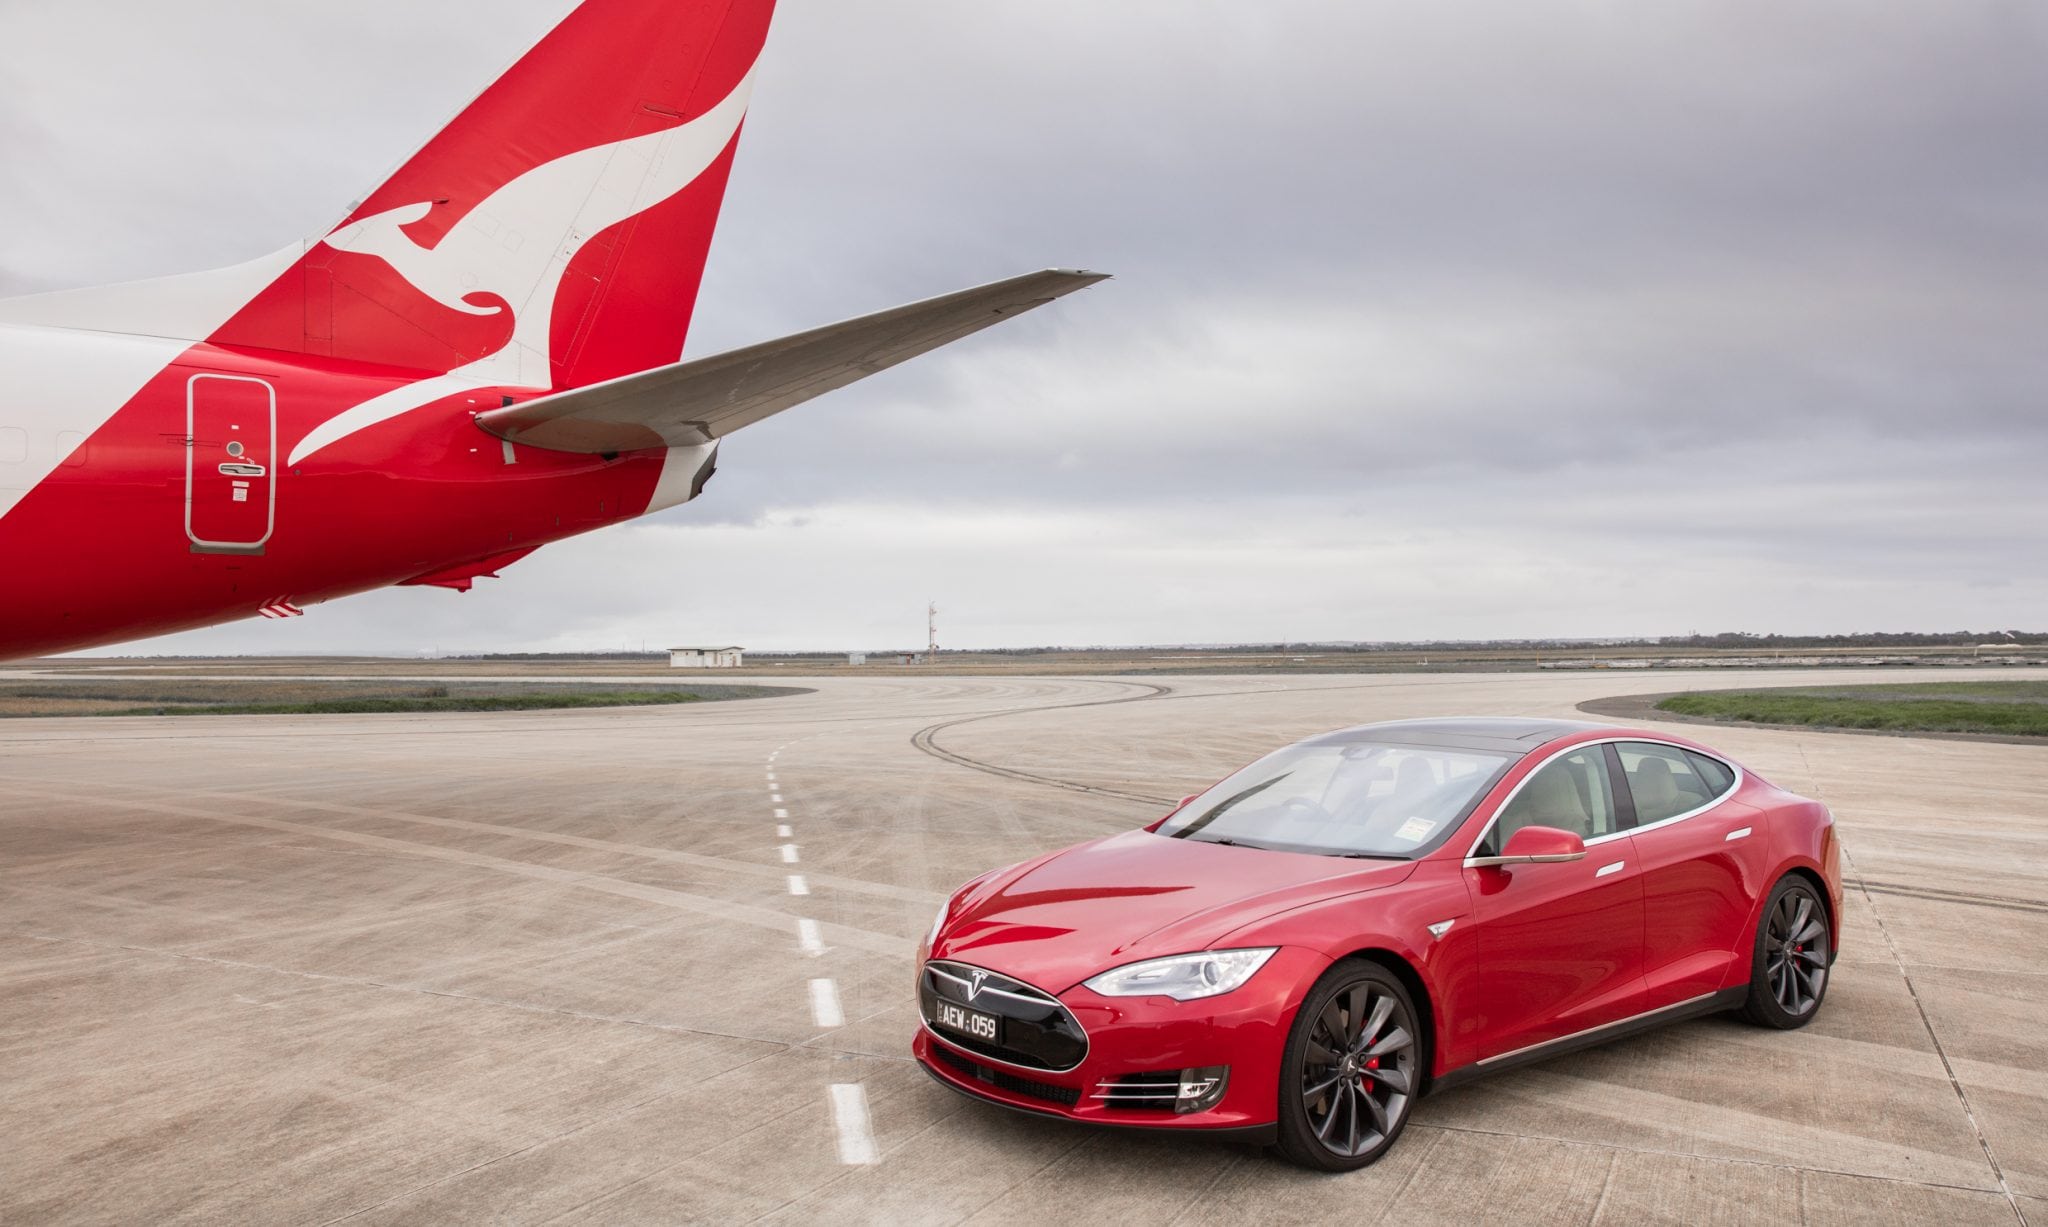 A Qantas Boeing 737 races a Tesla Model S to mark launch of new sustainability collaboration.  